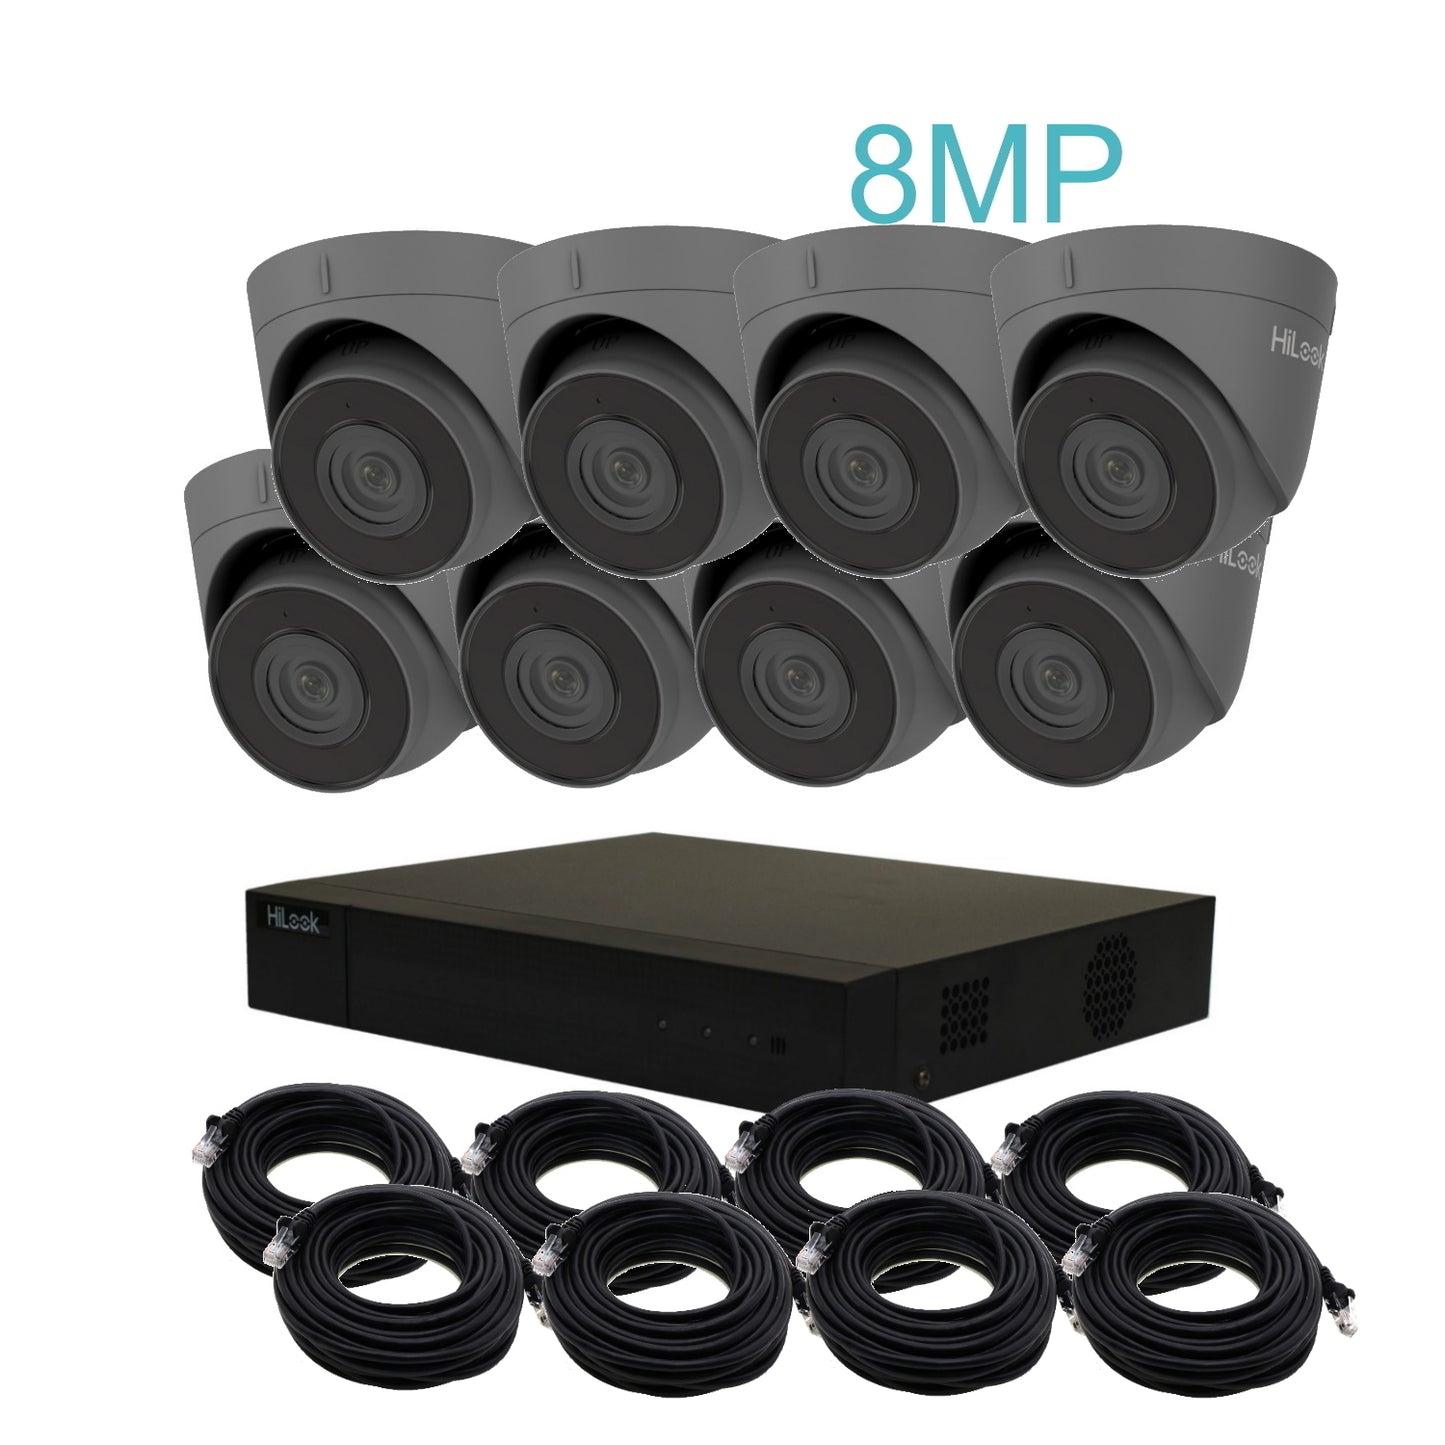 8MP 4K HiLook IP POE CCTV Kit With 8 Cameras, Built-in Mic, 4TB HDD & Ready Made Cables